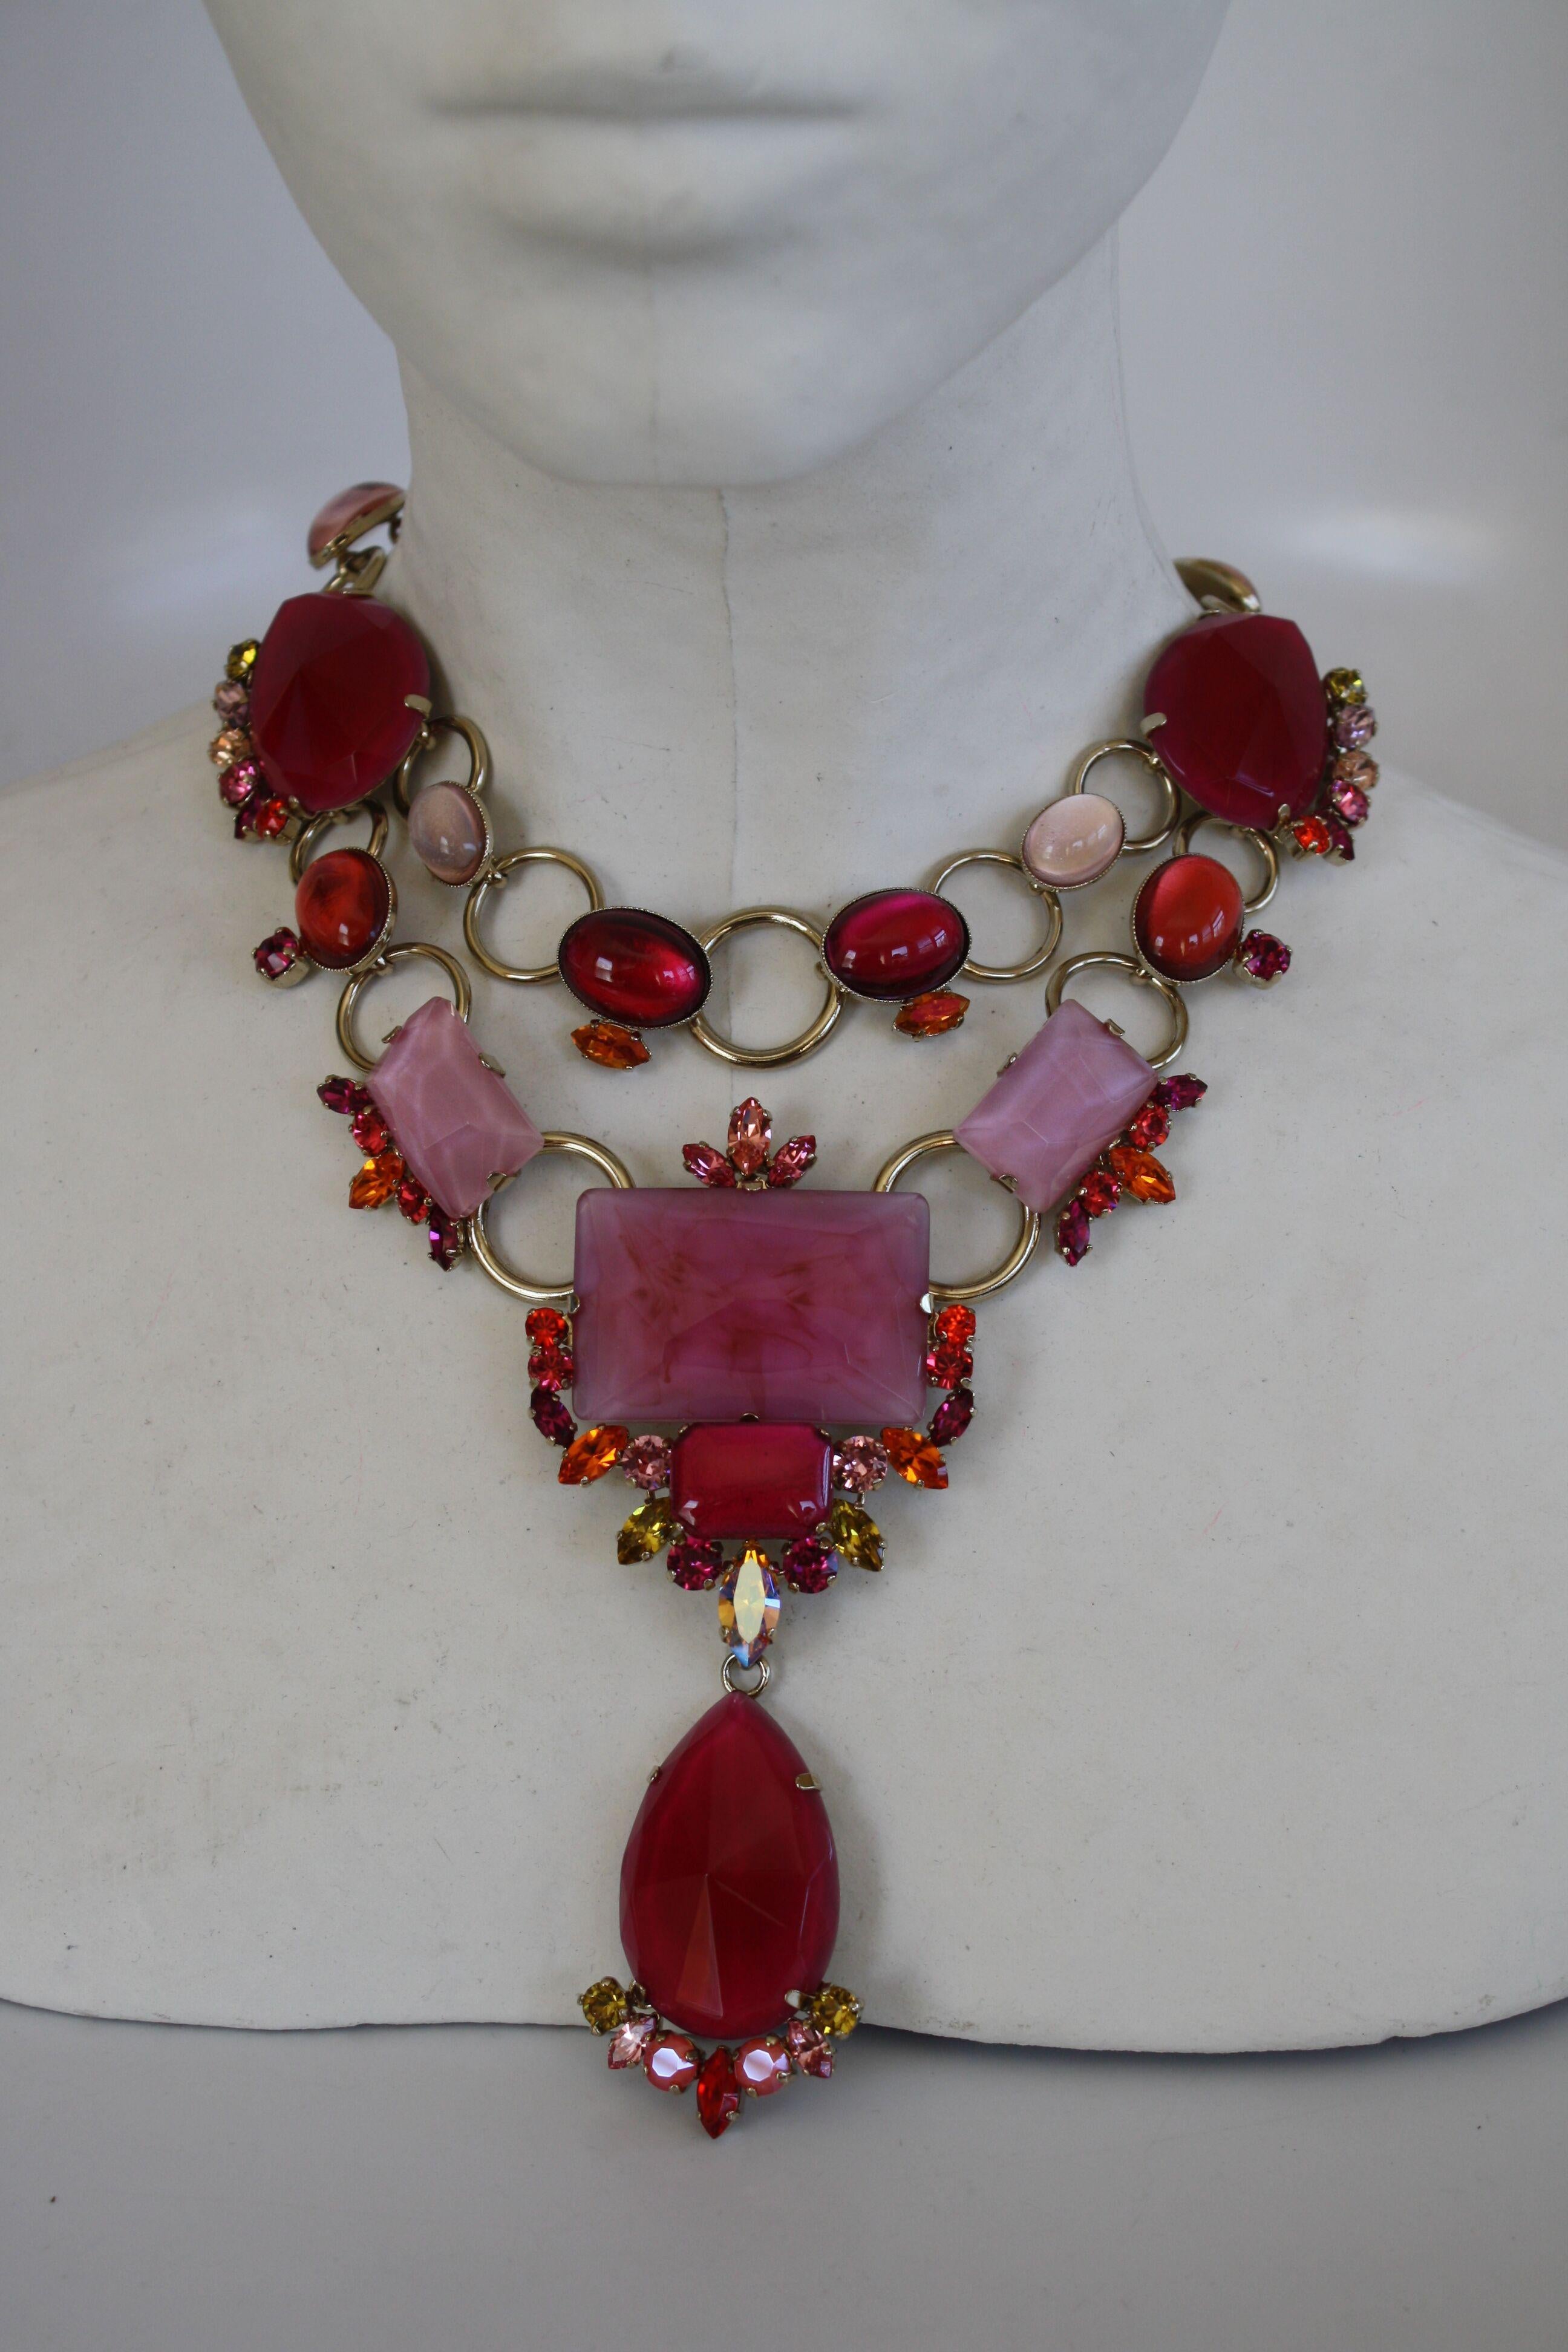 Statement necklace made from Swarovski Crystals and glass in shades of pink and fuchsia. Drop is 4